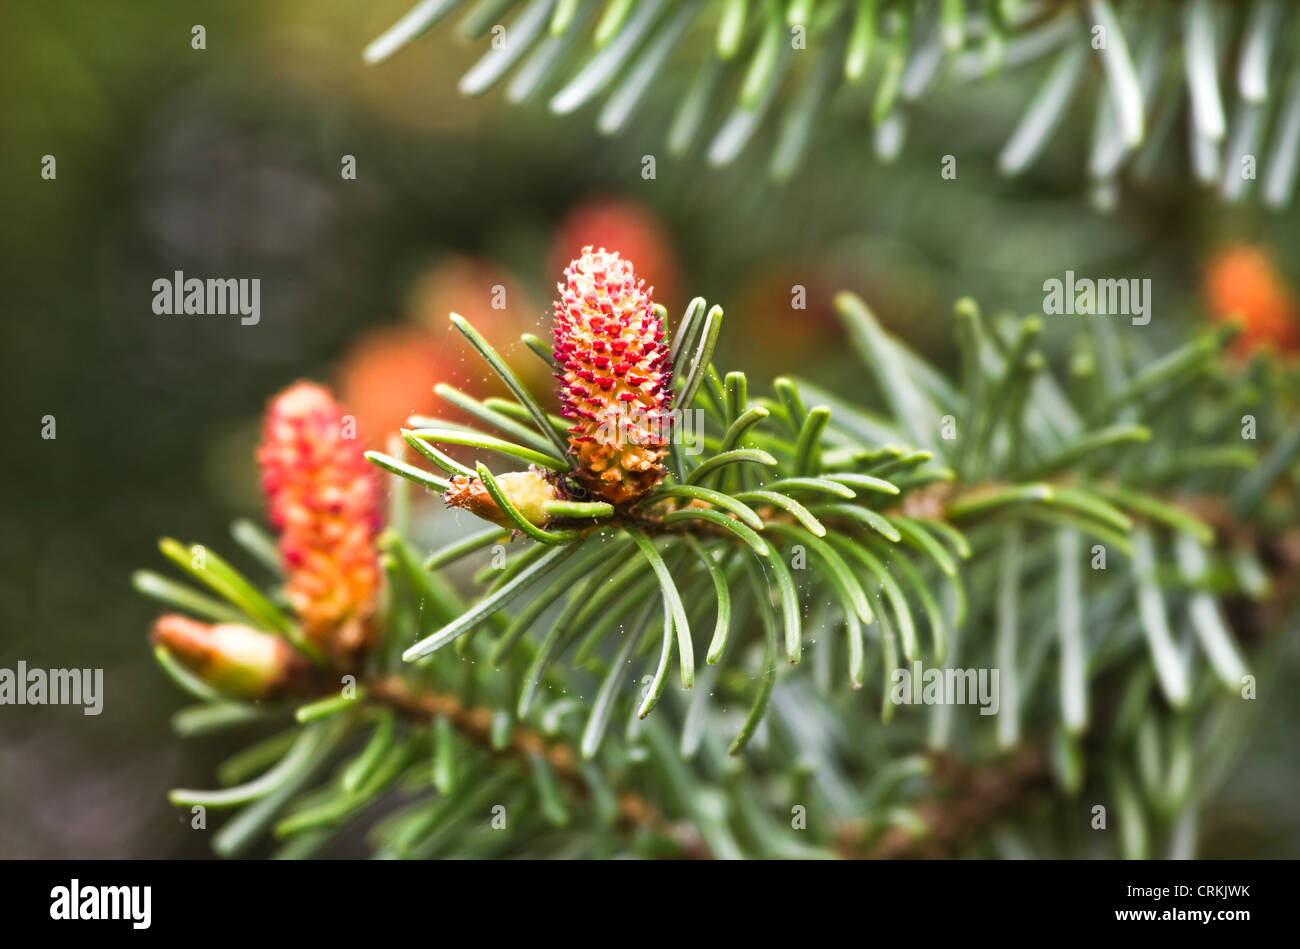 Flowers in spring on christmas tree, Spruce or Picea abies Stock Photo